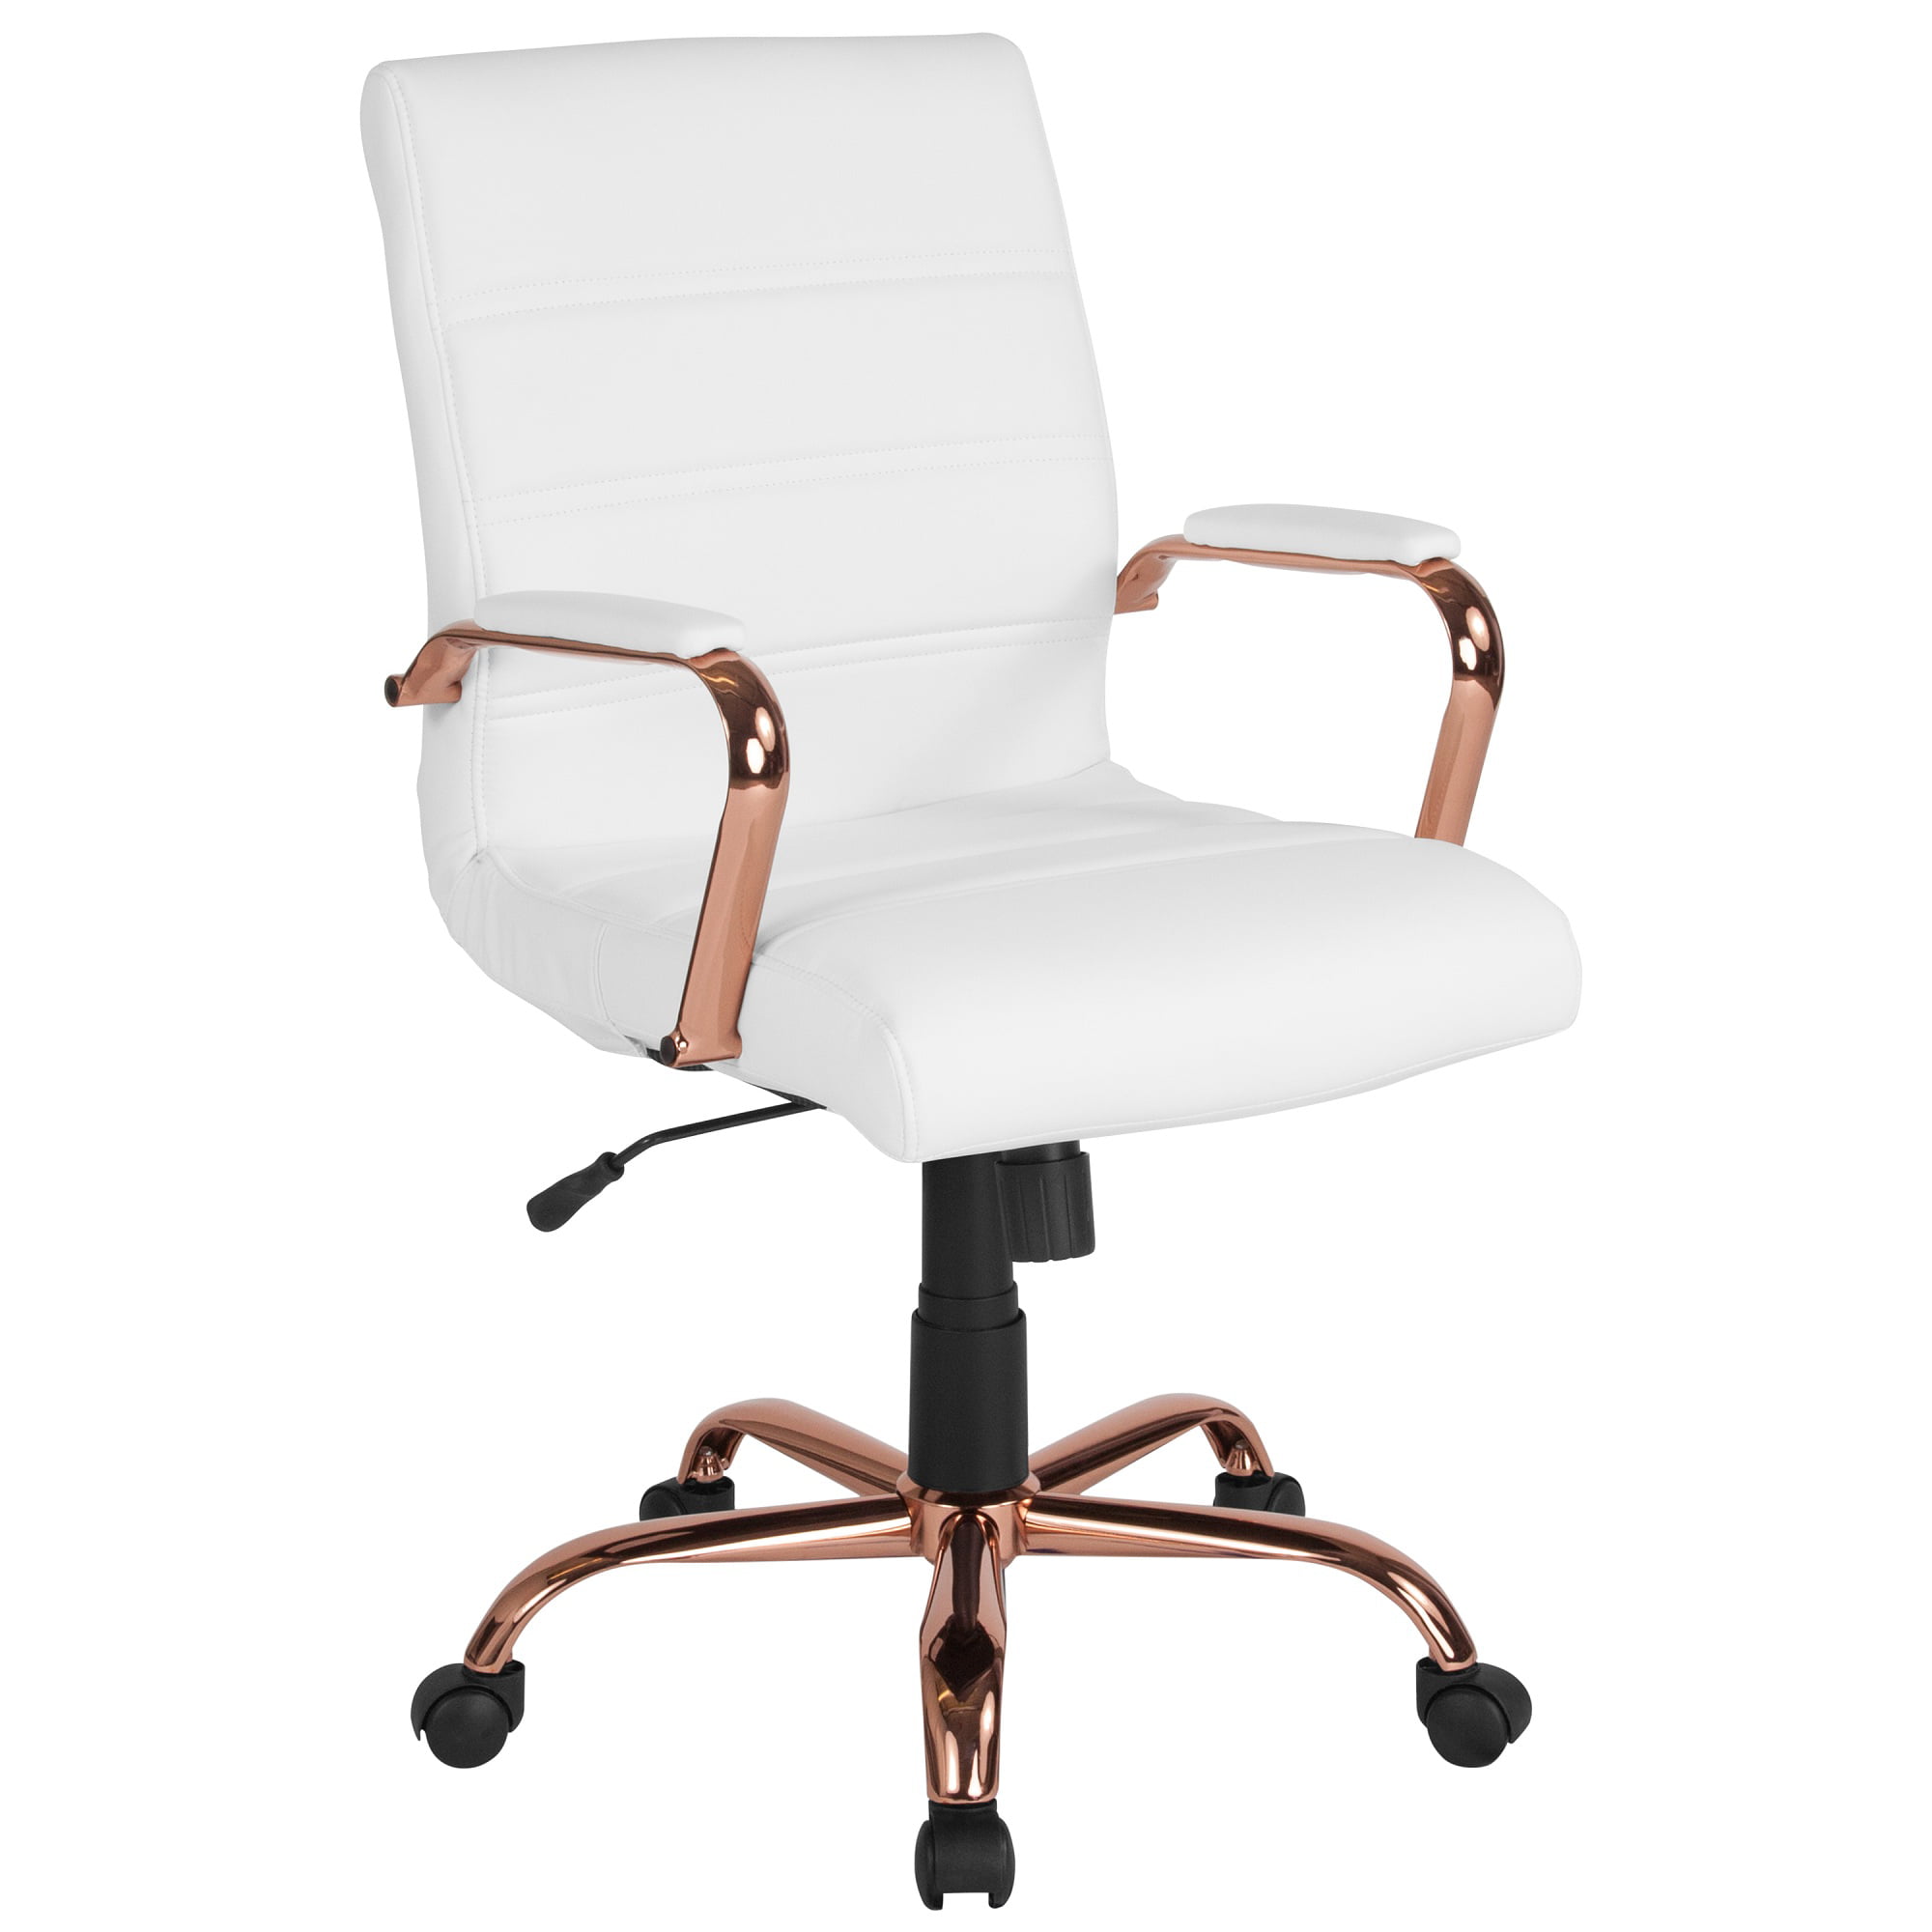 40.75" MidBack White Leather Executive Swivel Office